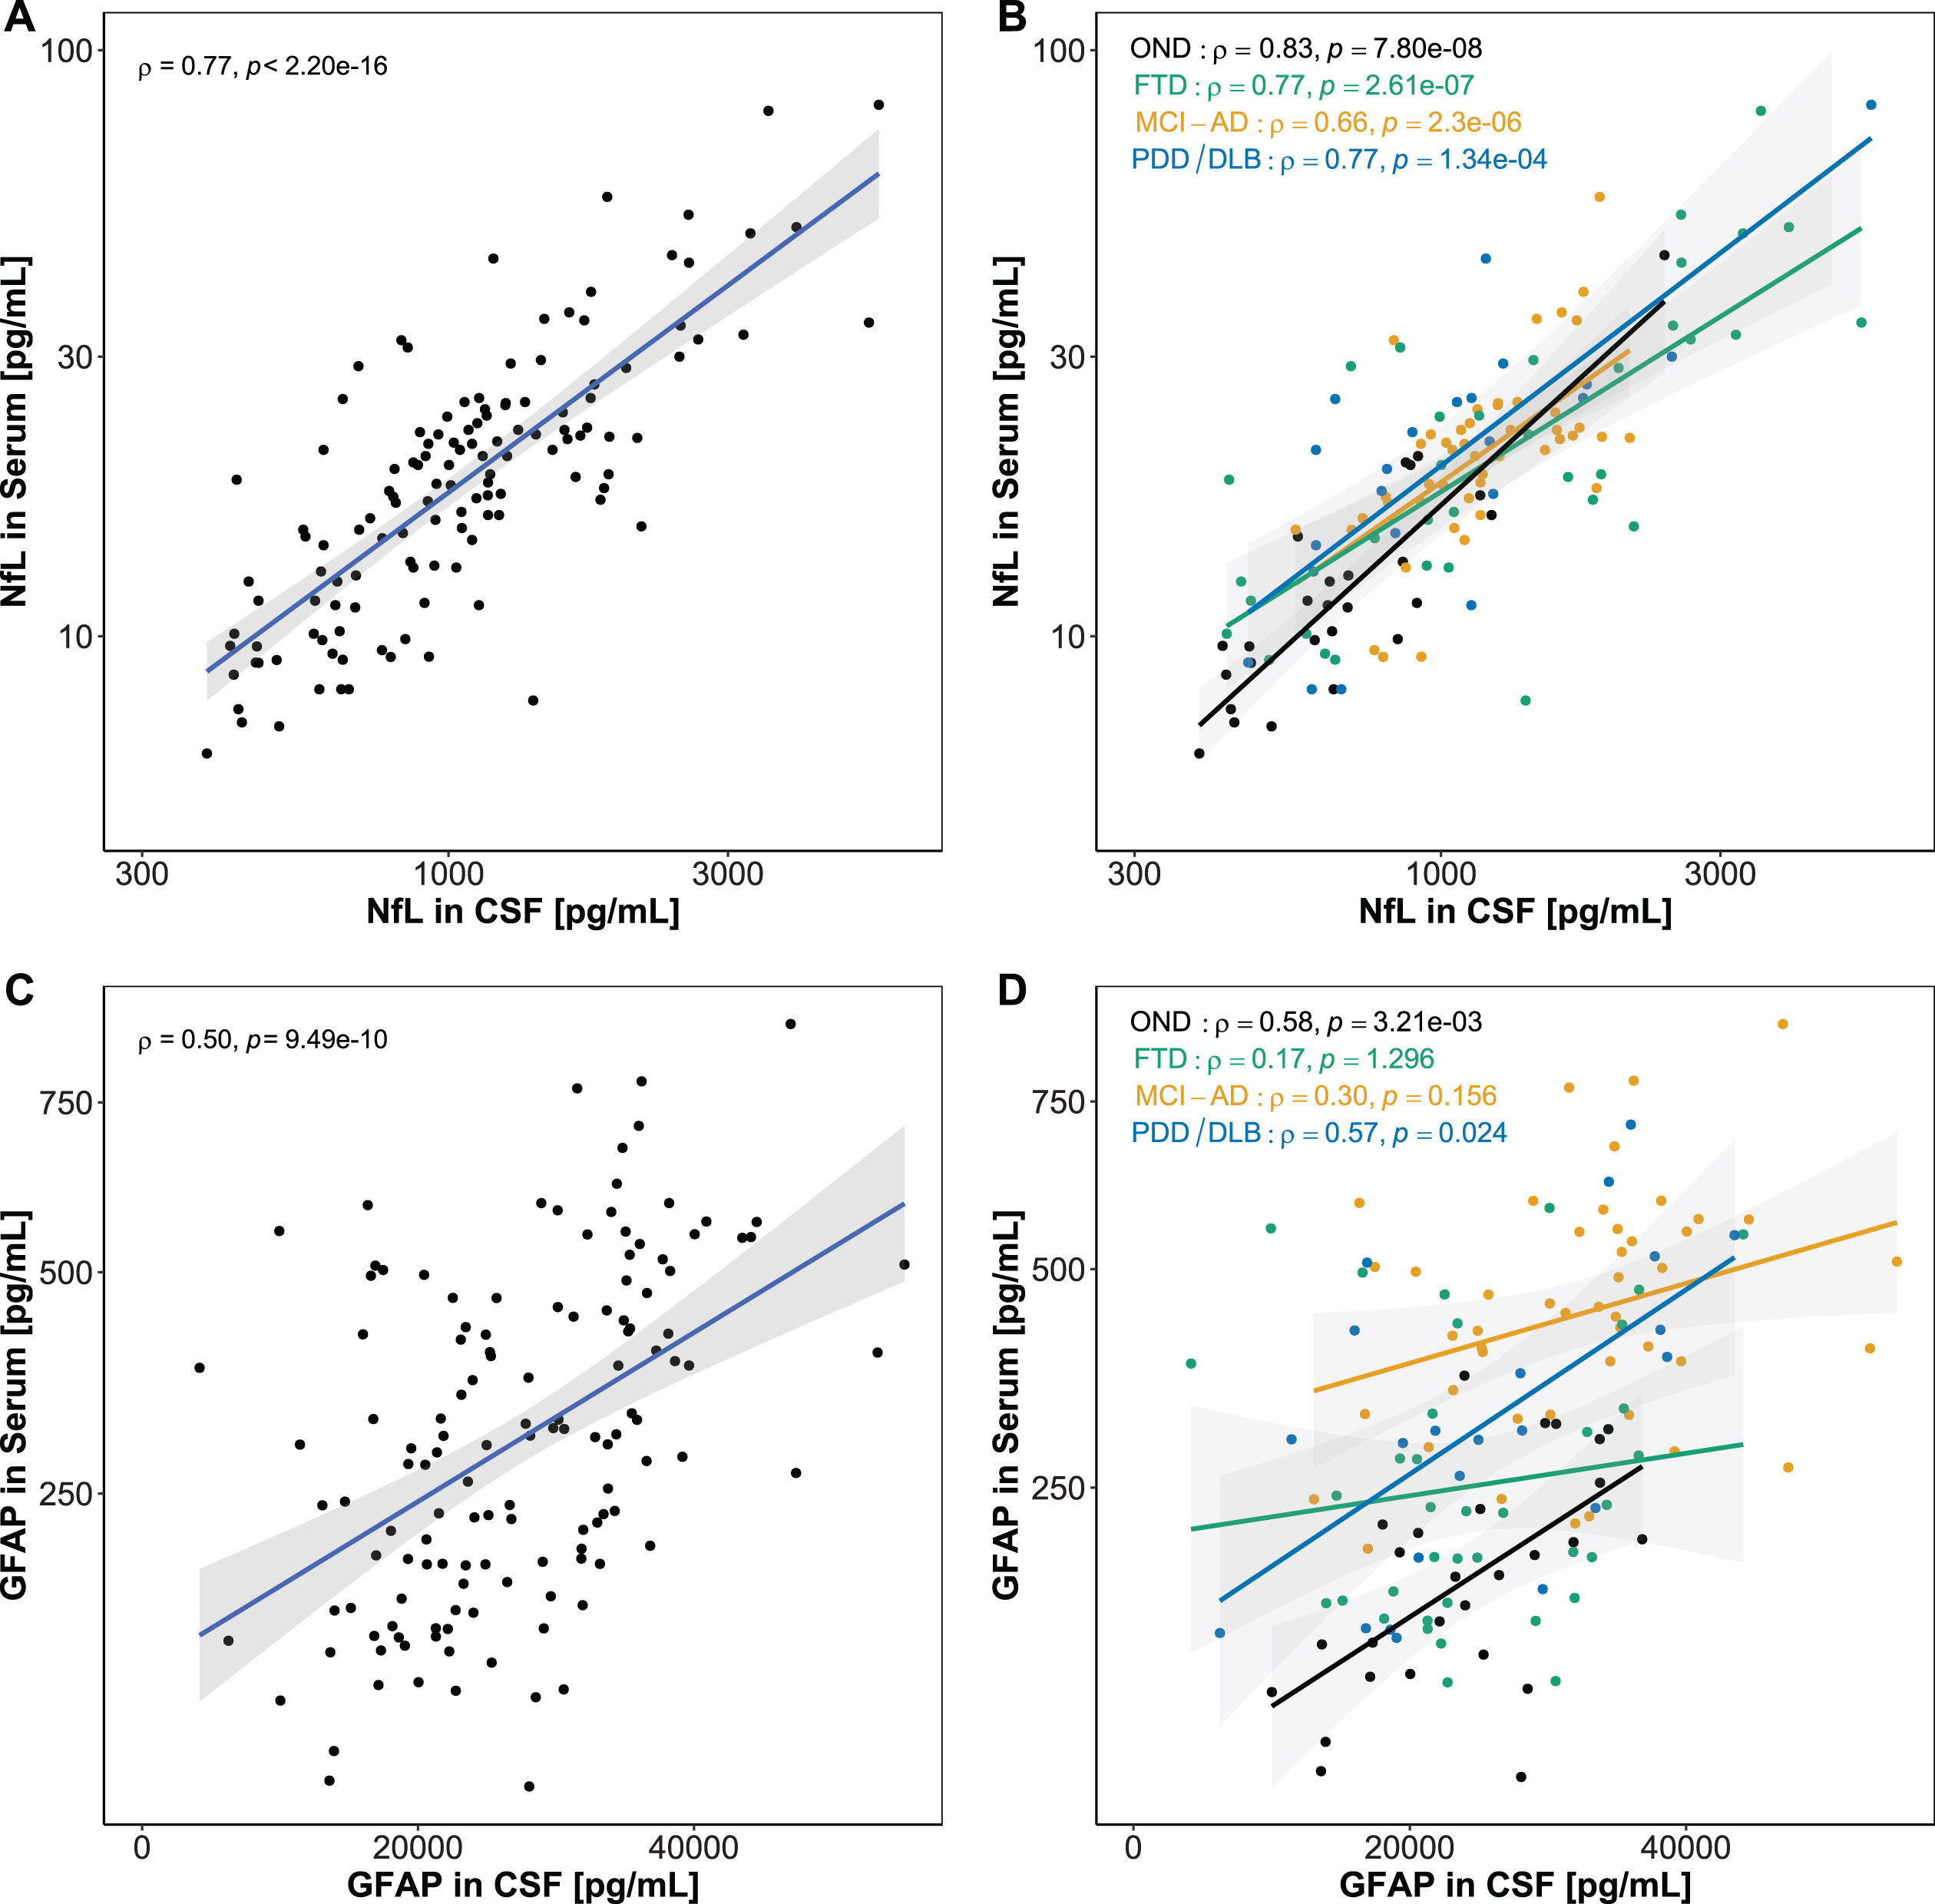 Association between CSF and serum biomarkers. Associations between CSF and serum biomarkers were assessed using Spearman’s correlation. A) A significant strong correlation was found for CSF and serum NfL. B) CSF and serum GFAP correlated moderately in the whole cohort. C) NfL in serum and CSF correlated in all diagnostic groups. D) GFAP in serum and CSF correlated in PDD/DLB, and showed a positive trend in OND and MCI-AD. No correlation was observed in FTD. Lines represent linear regression and grey areas represent 95% confidence intervals. CSF, Cerebrospinal fluid; NfL, Neurofilament light; GFAP, Glial fibrillary acidic protein; OND, Other neurological disease; FTD, Frontotemporal dementia; MCI-AD, Mild cognitive impairment due to Alzheimer’s disease; PDD/DLB, Lewy body dementias.